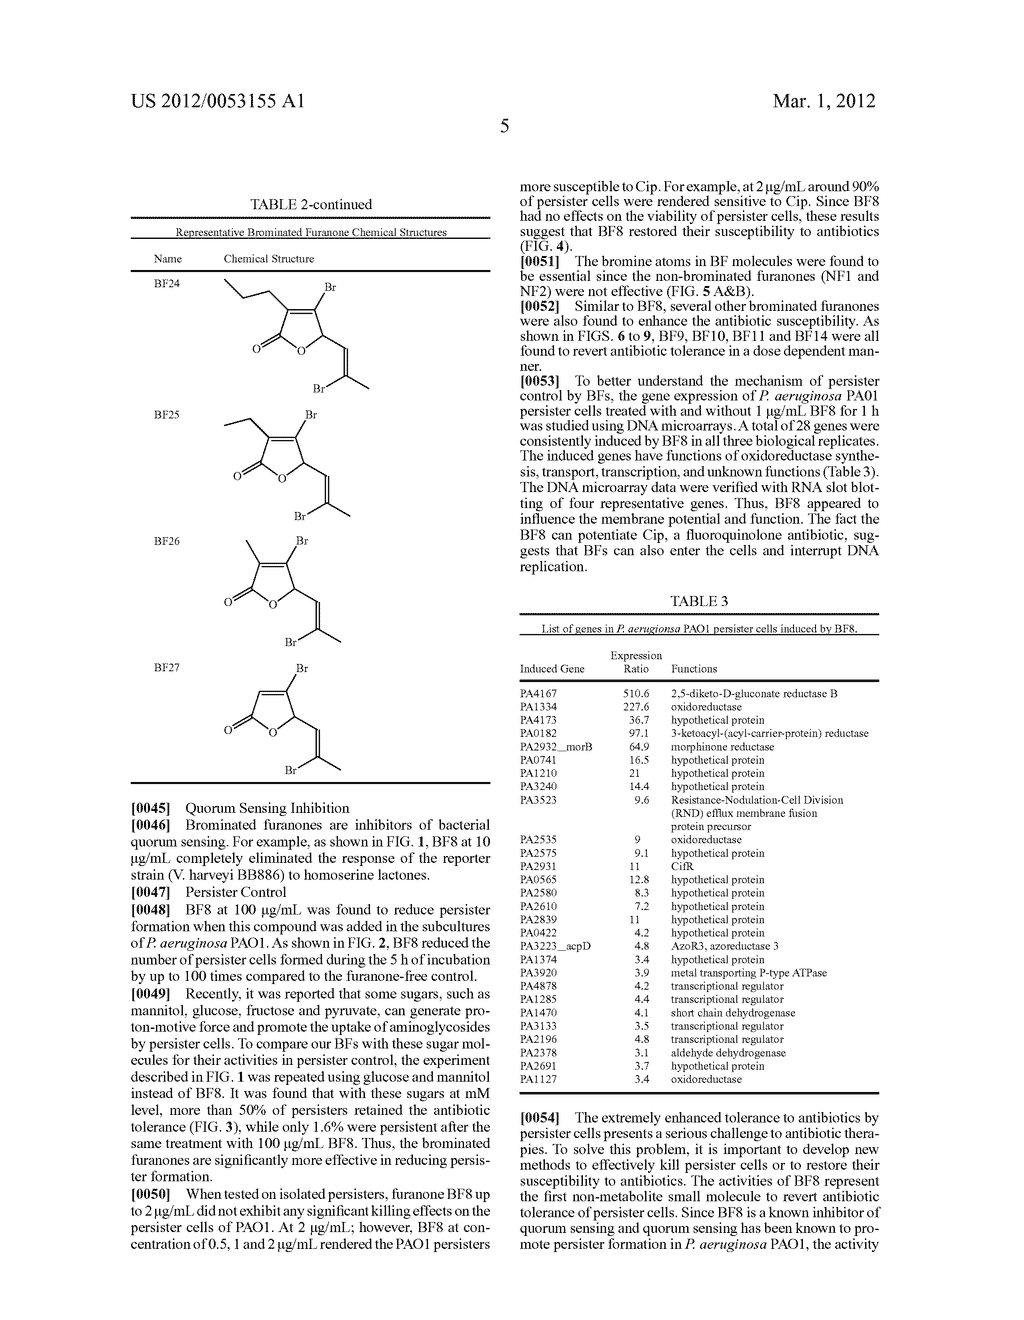 SYSTEM AND METHOD FOR REVERTING ANTIBIOTIC TOLERANCE OF BACTERIAL     PERSISTER CELLS - diagram, schematic, and image 15